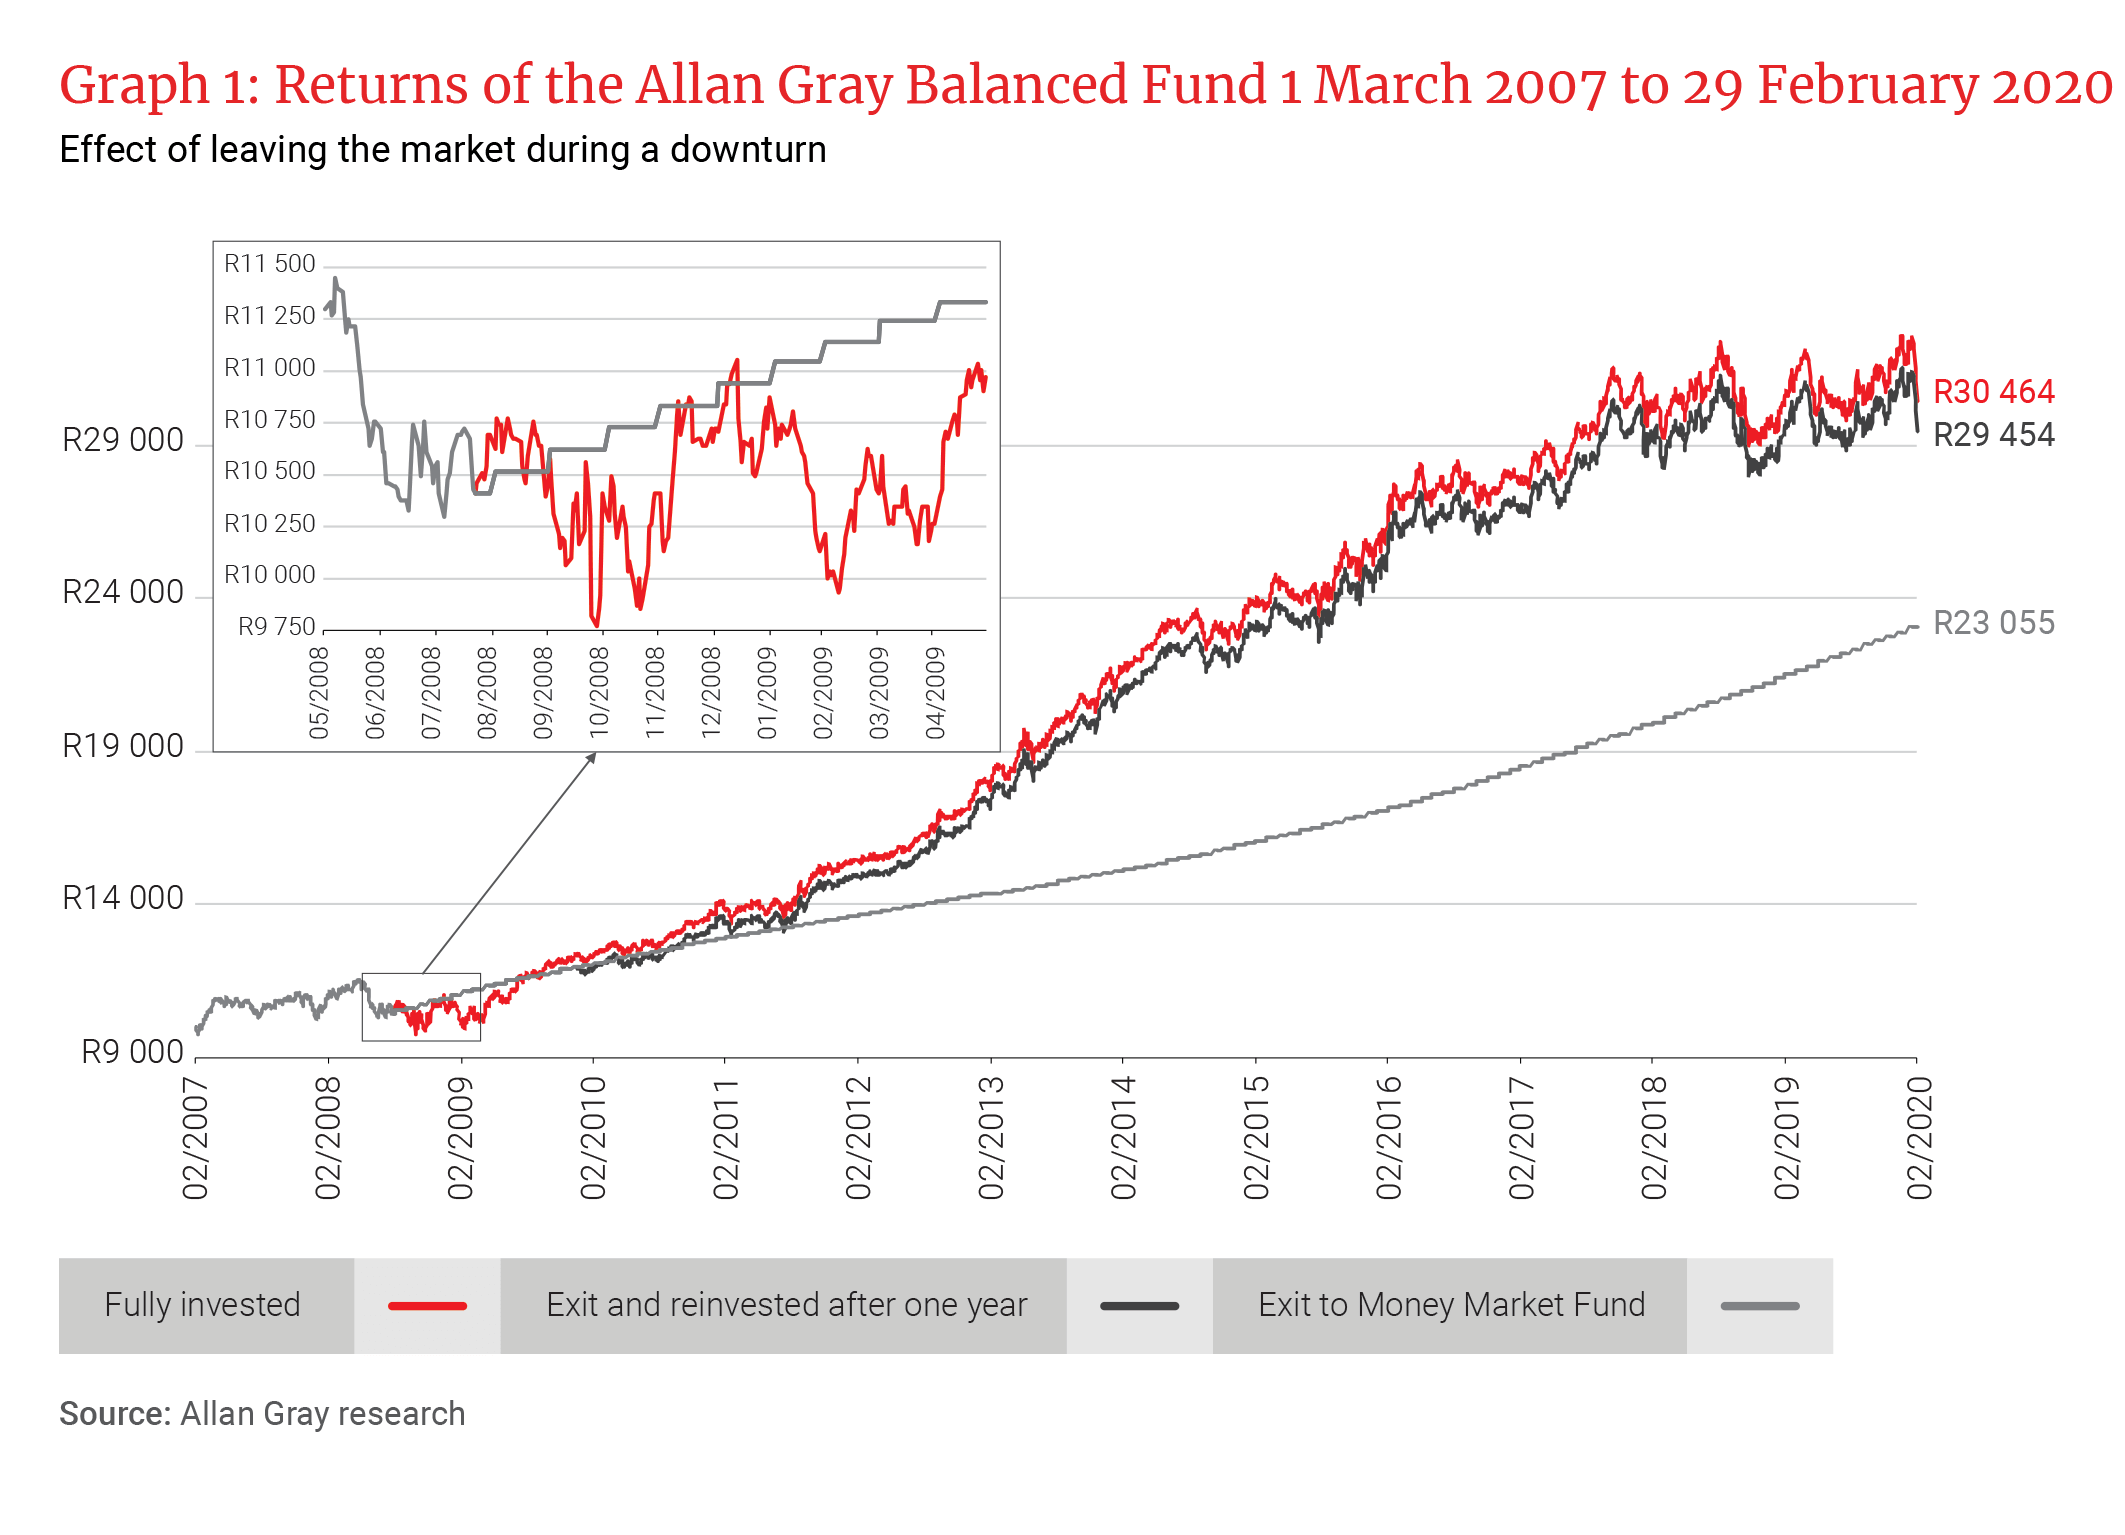 Returns of Allan Gray Balanced Fund 01 March 2007 to 29 February 2020 